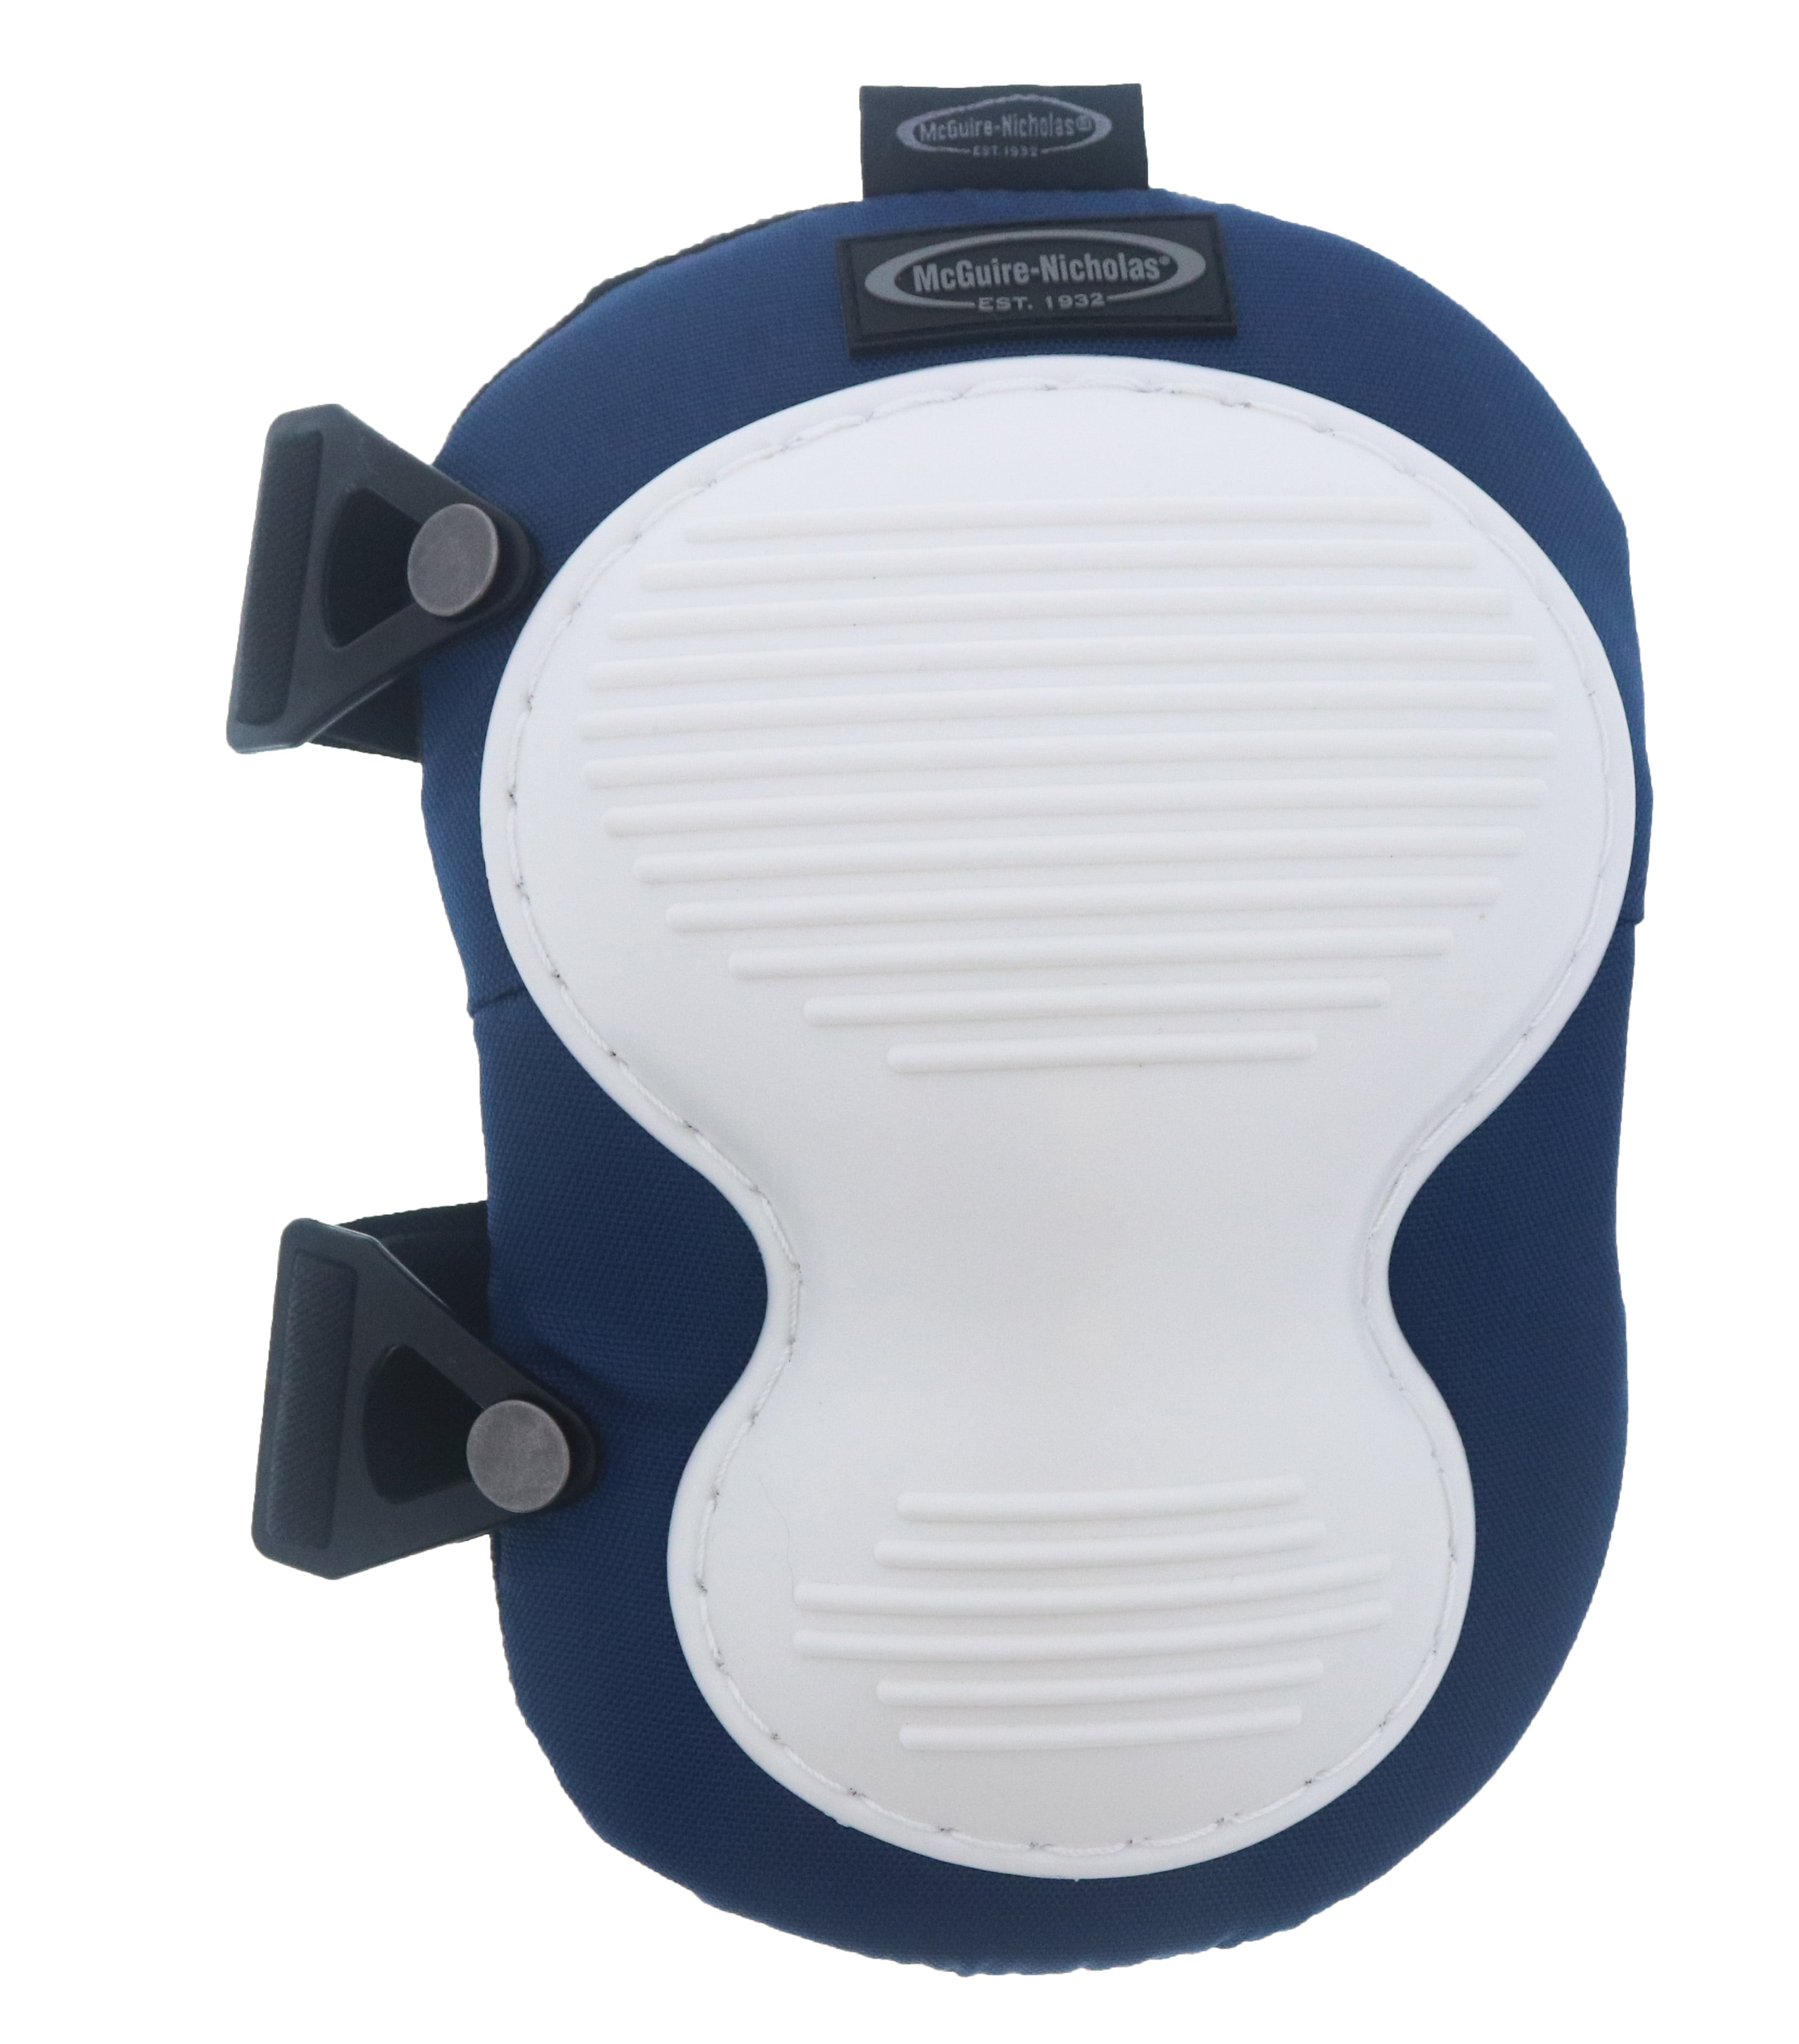 McGuire Nicholas 353X 1 Non Marring Kneepads in Blue and White Color Combination